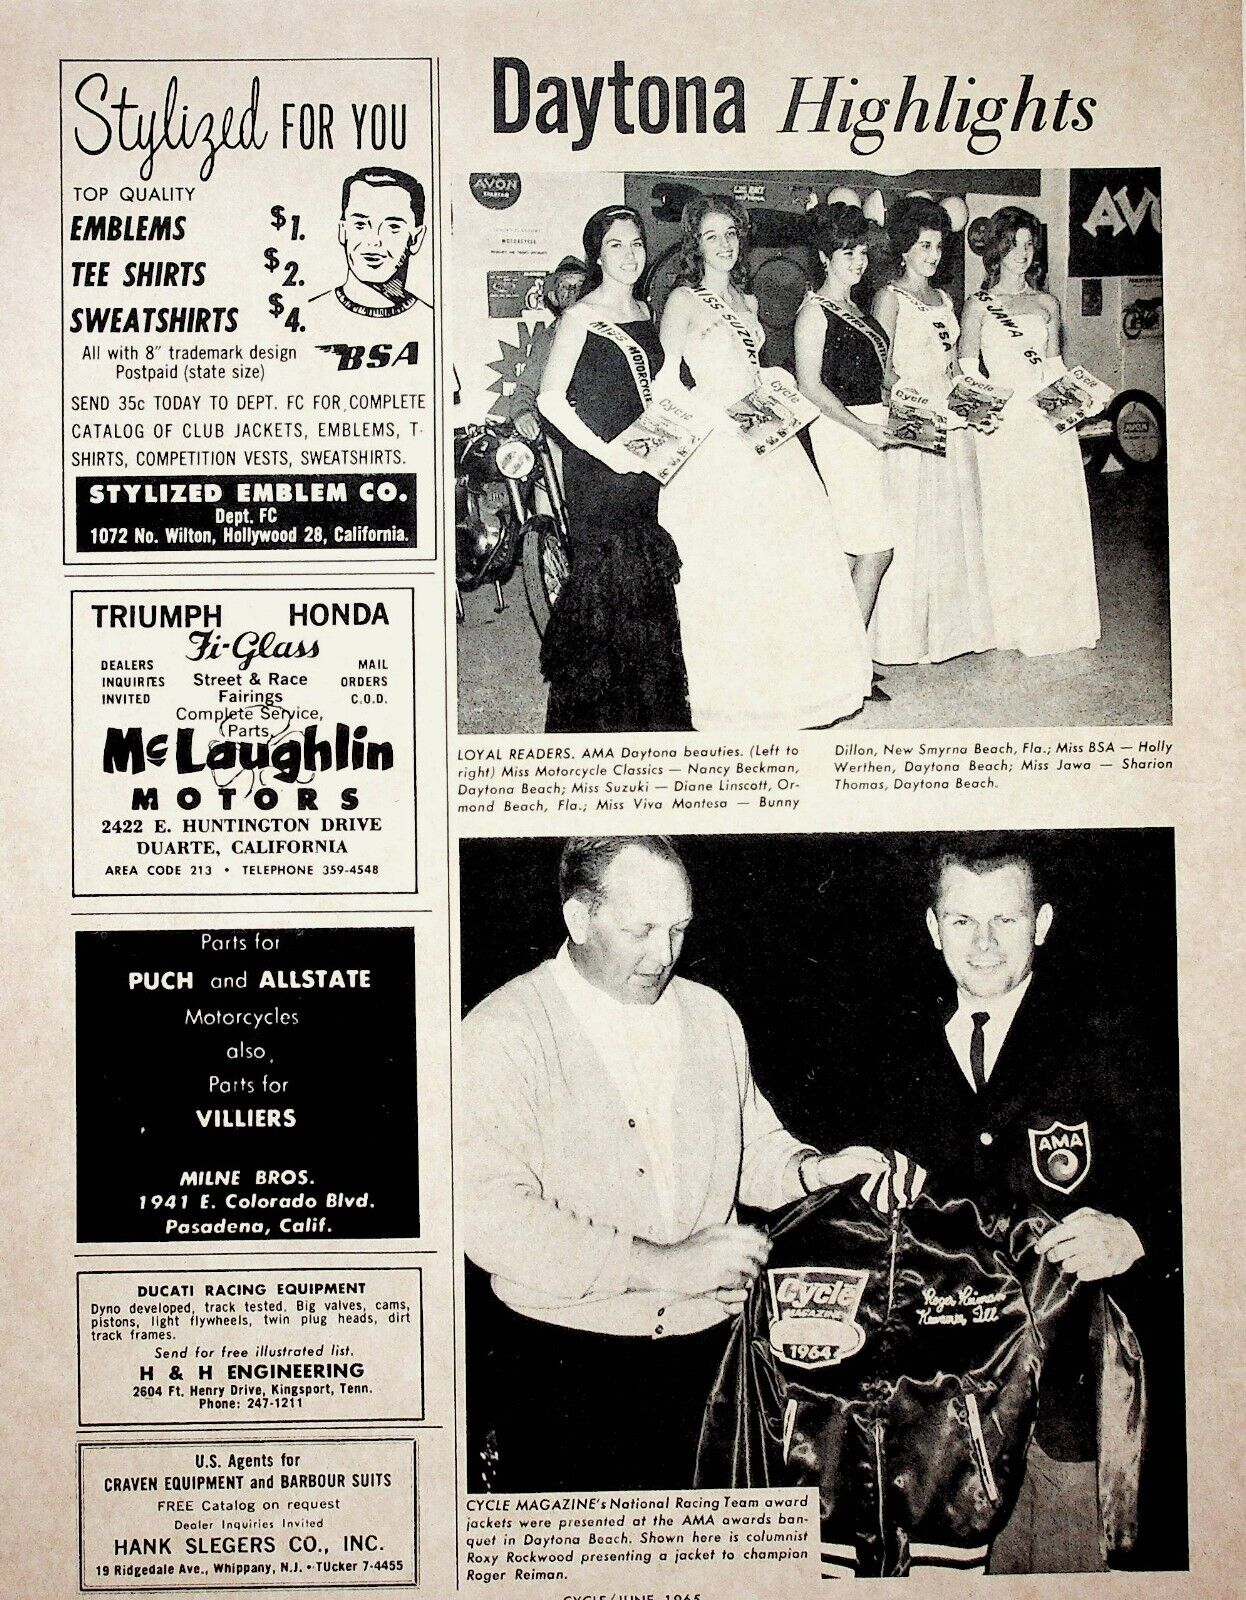 1965 Daytona Beach Roger Reiman Miss Motorcycle Classics -1-Page Vintage Article